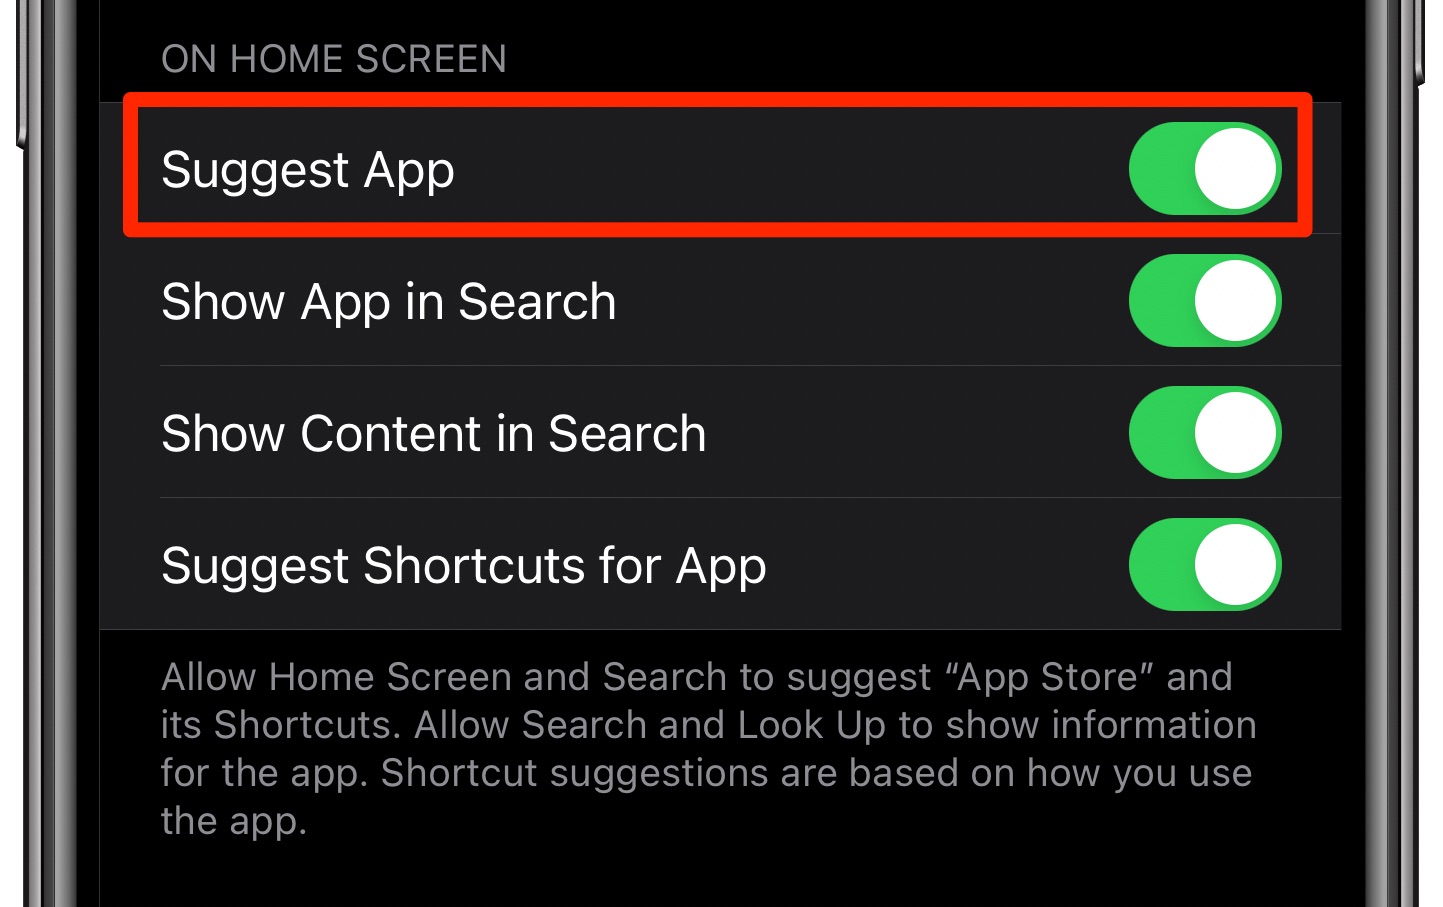 Siri Suggestions widget - enabling the Suggest App option for App Store in Siri & Search settings